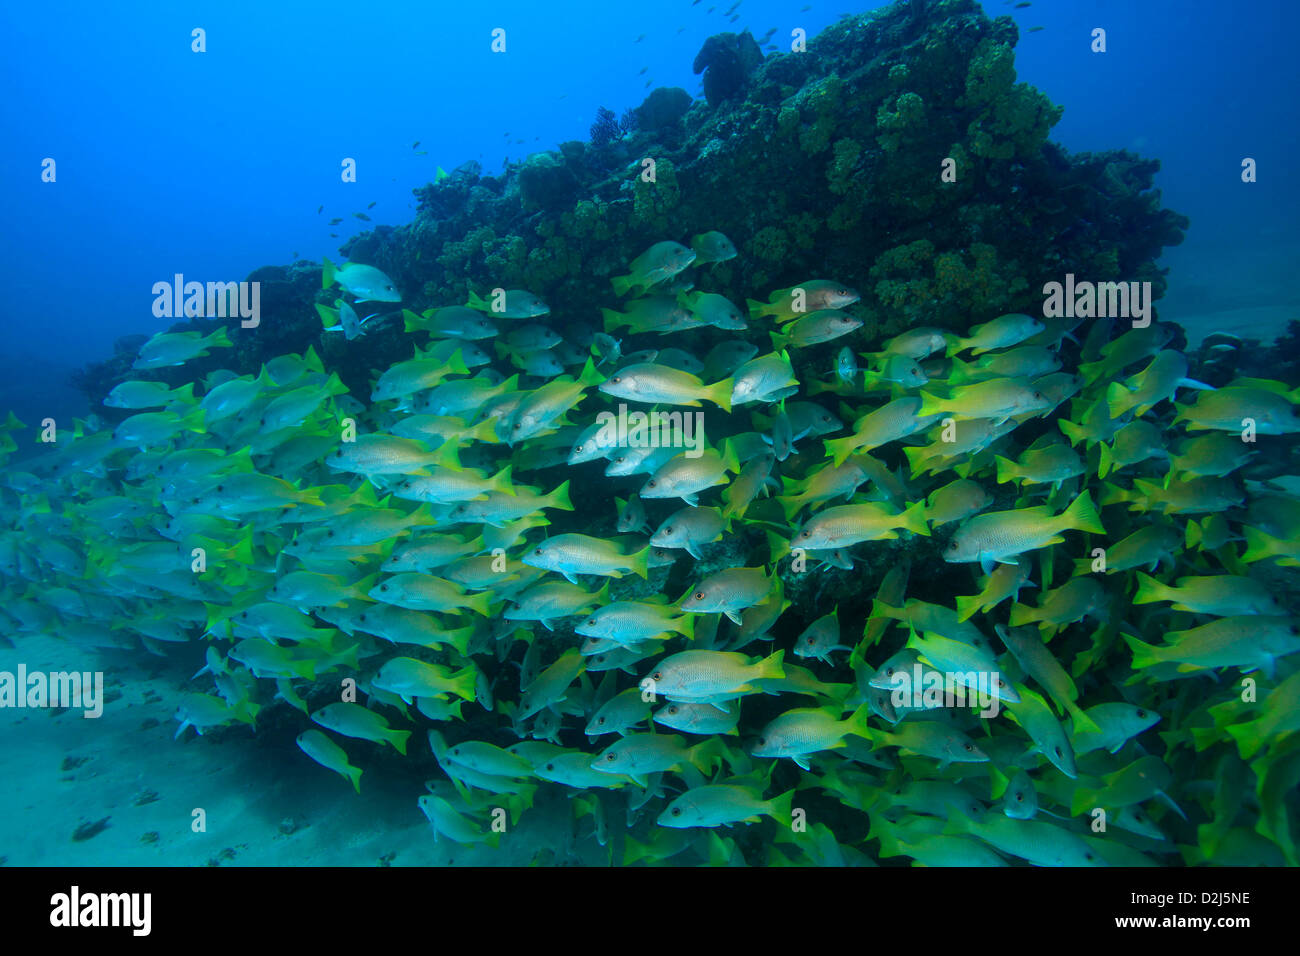 A large school yellowtail snapper on a coral reef at Cabo Pulmo National Marine Park, Mexico. Stock Photo